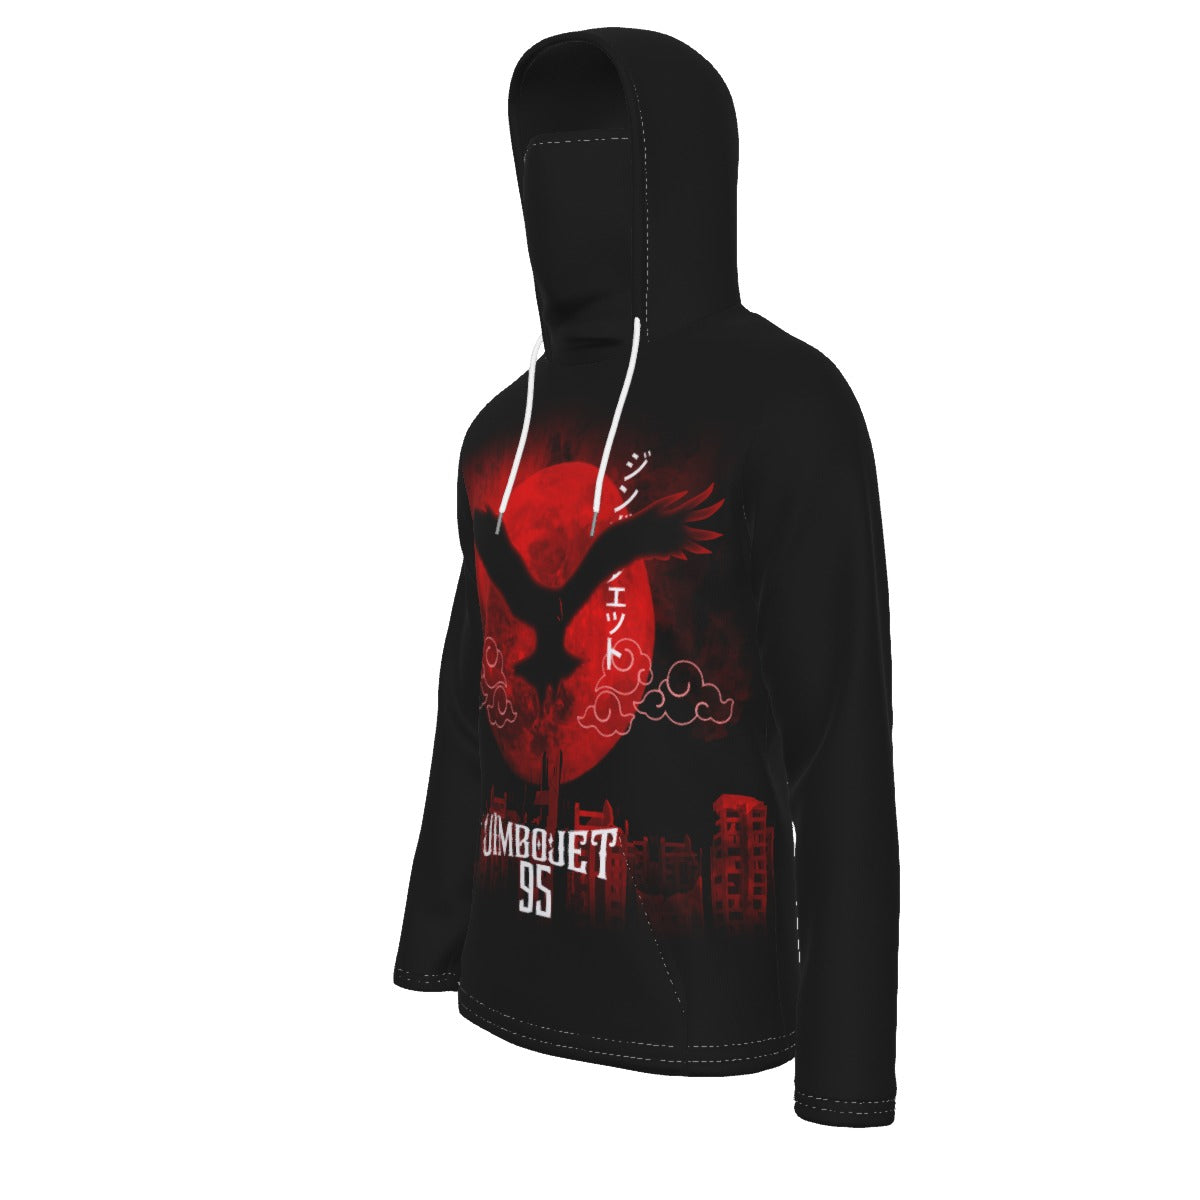 JimboJet95 Men's All Over Print Hoodie With Mask